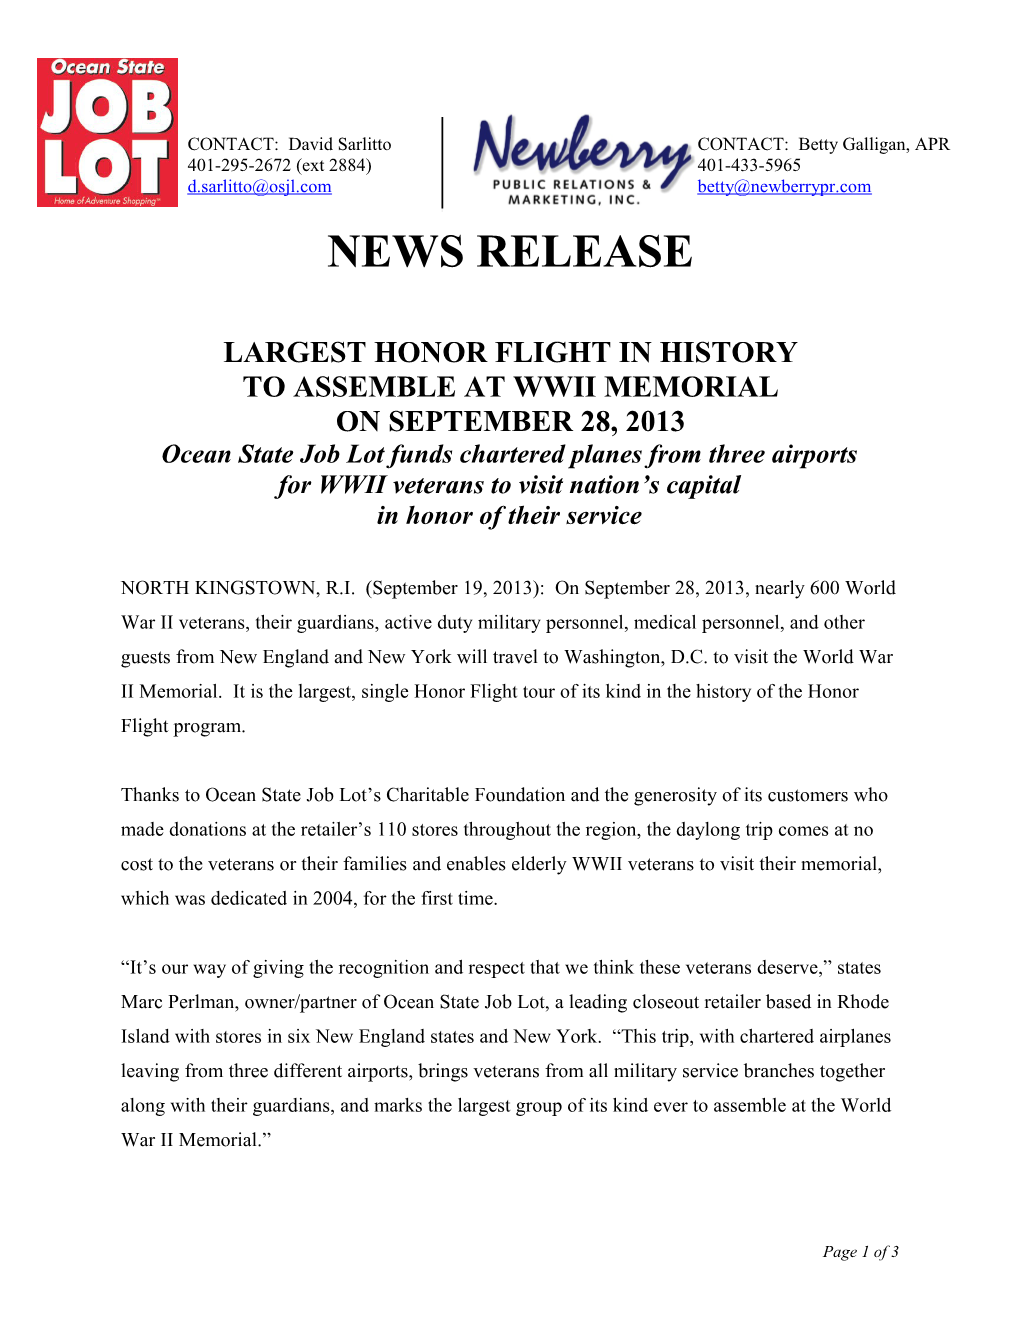 Largest Honor Flight in History